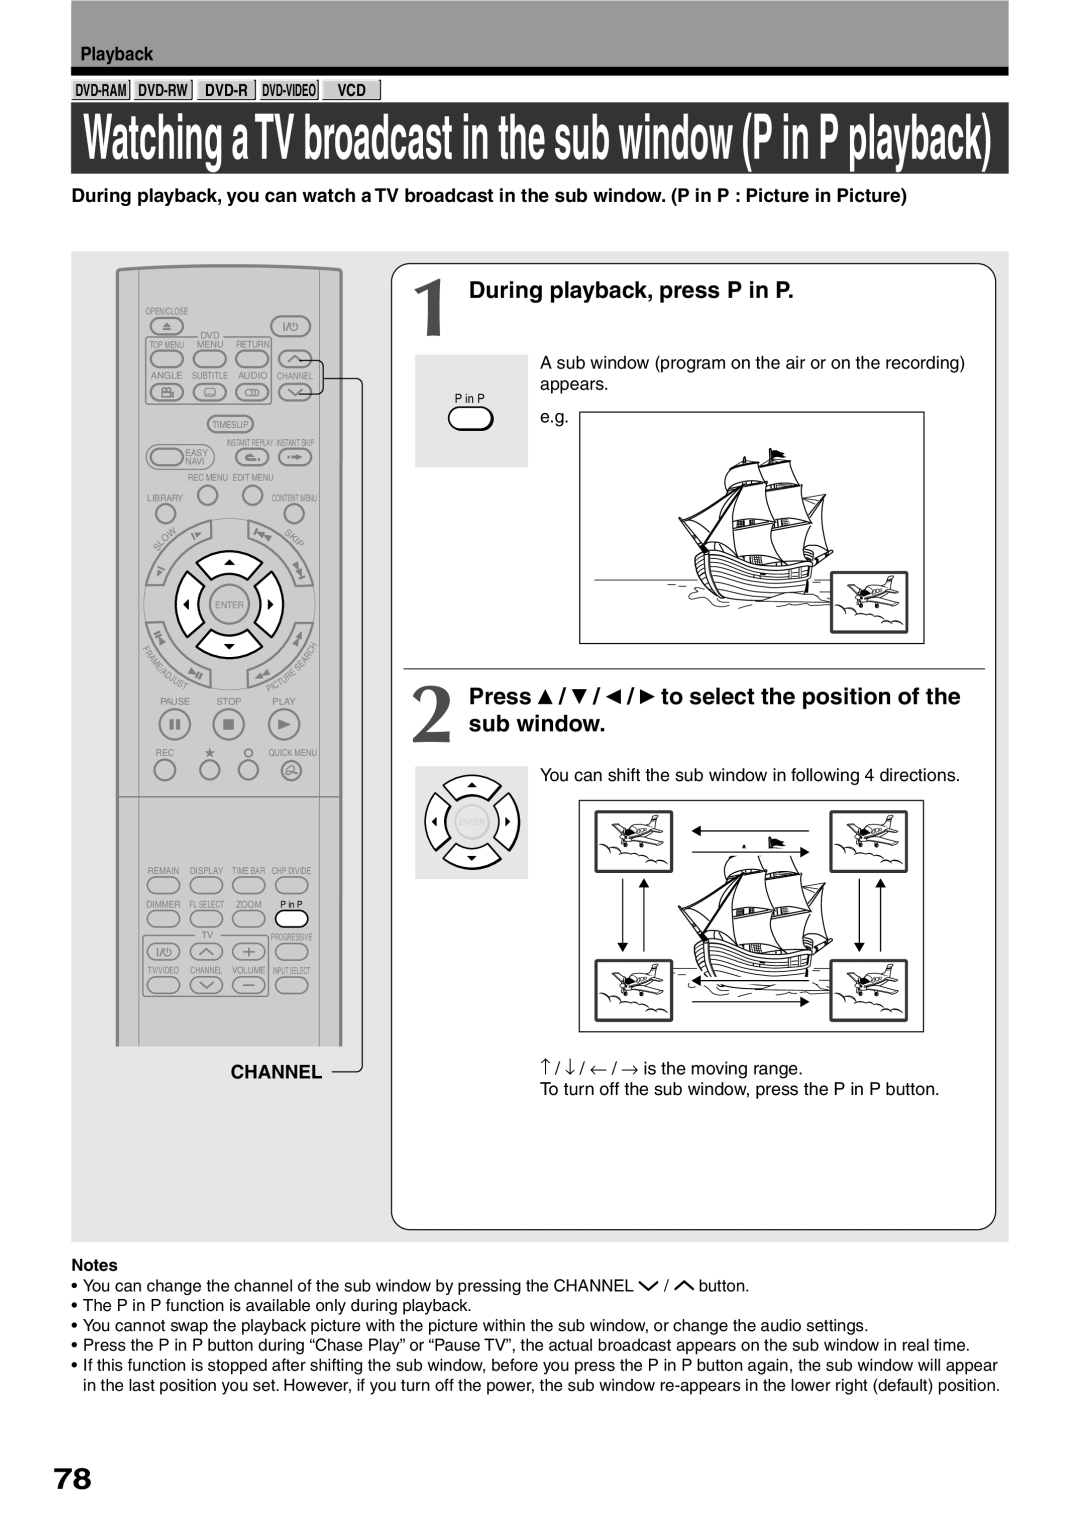 Toshiba D-R2SU During playback, press P in P, Press / / / to select the position of the sub window, Channel, Playback 